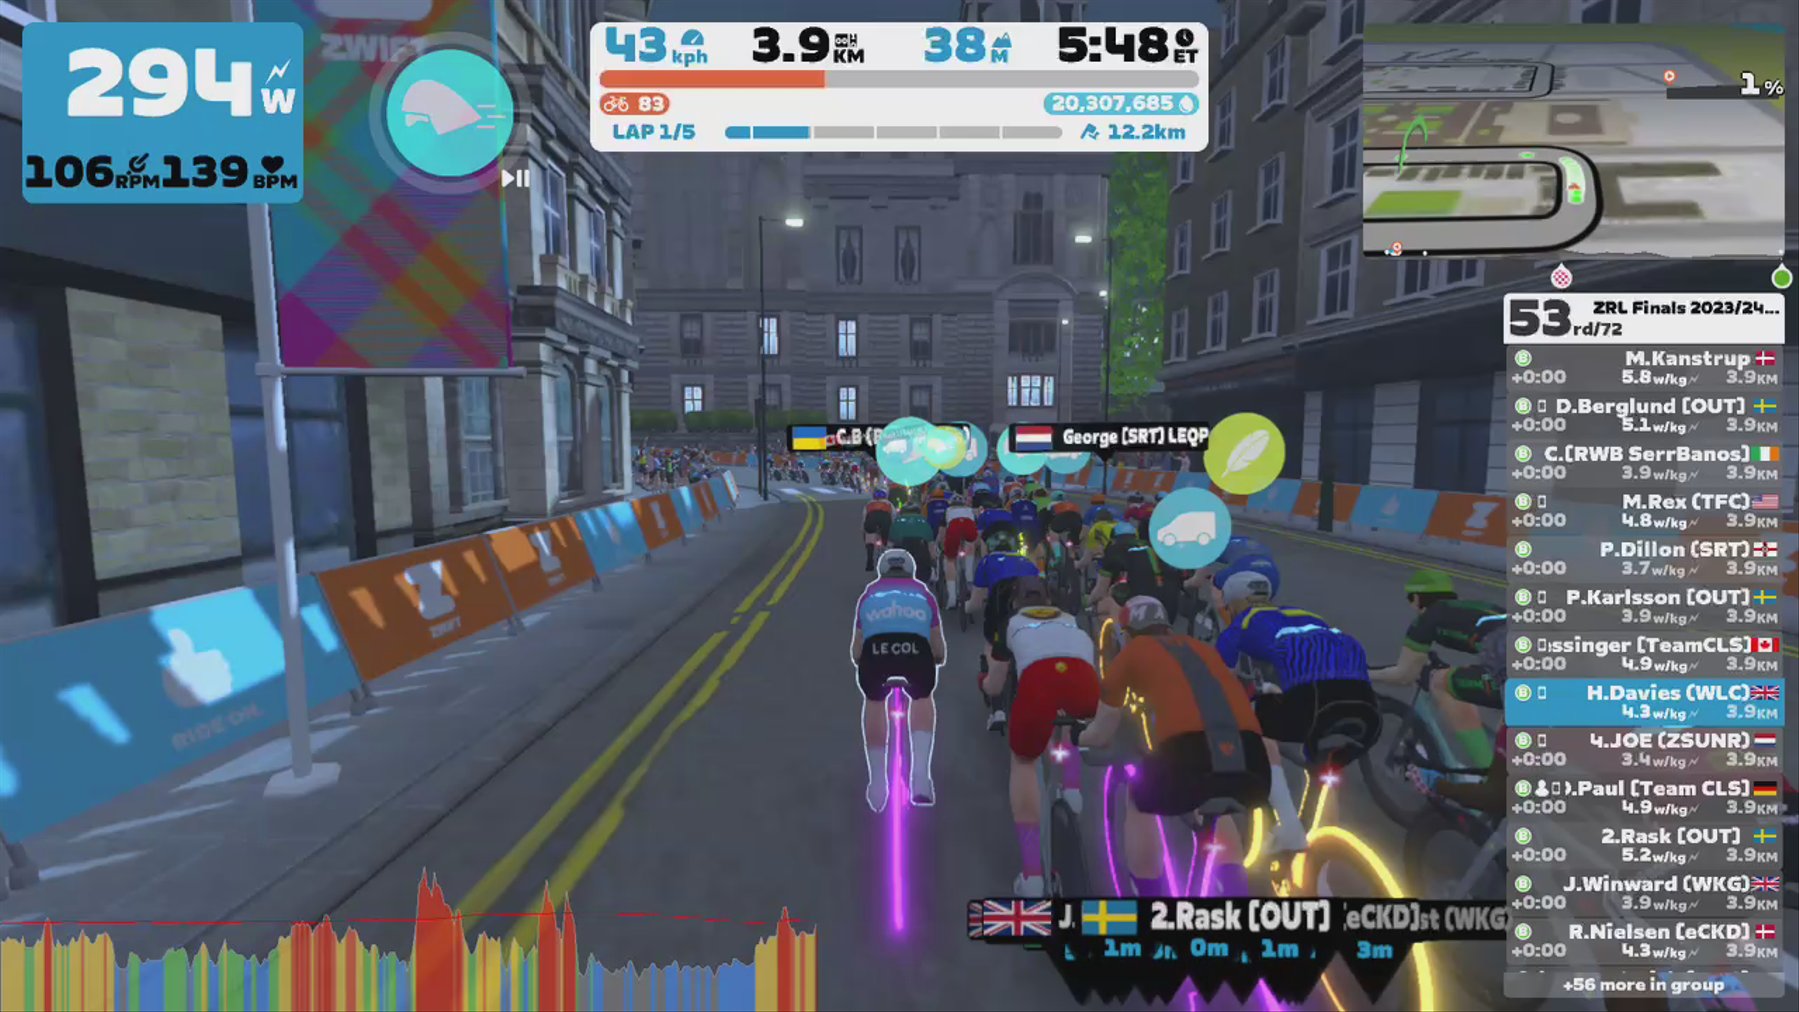 Zwift - Race: ZRL Finals 2023/24 - Open EMEAW Division 1 - Cup Final (Part2) (B) on Glasgow Reverse in Scotland